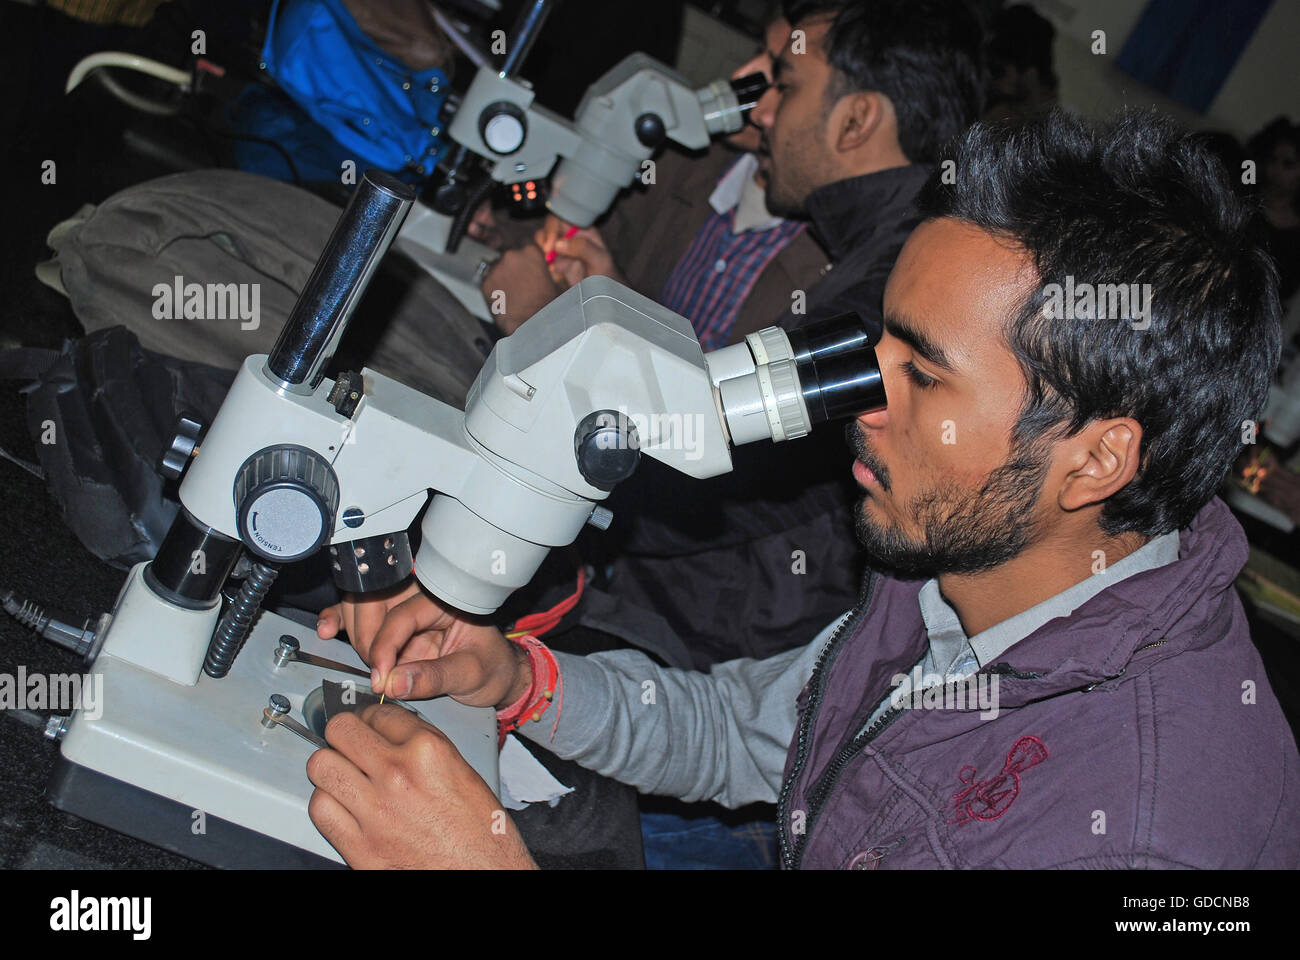 Students observing in the Laboratory Stock Photo